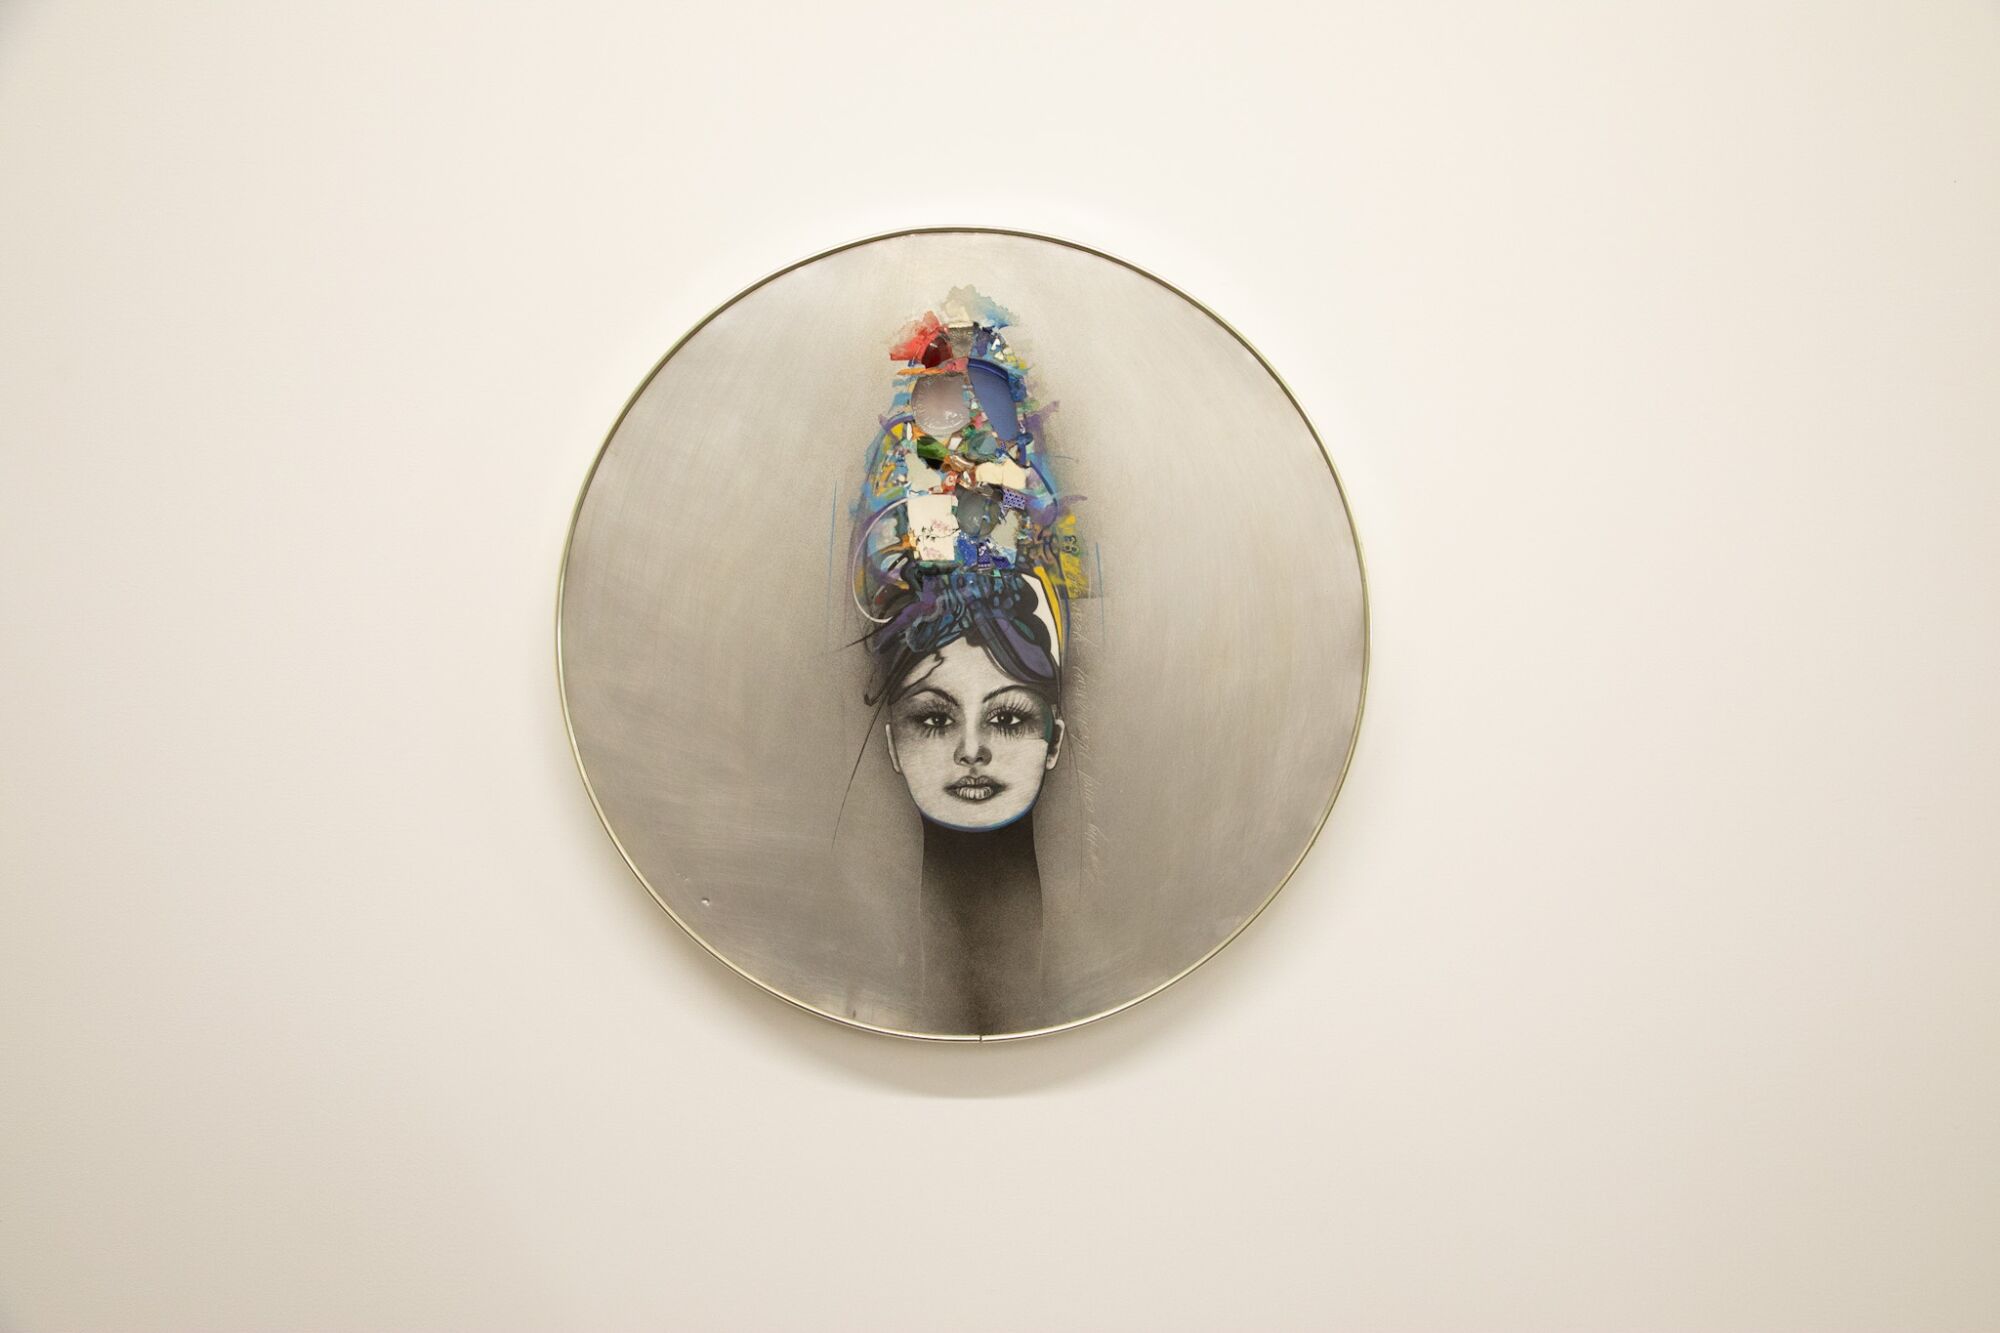 Timothy E. Washington THE QUEEN, 1983 etched aluminum, mixed media assemblage